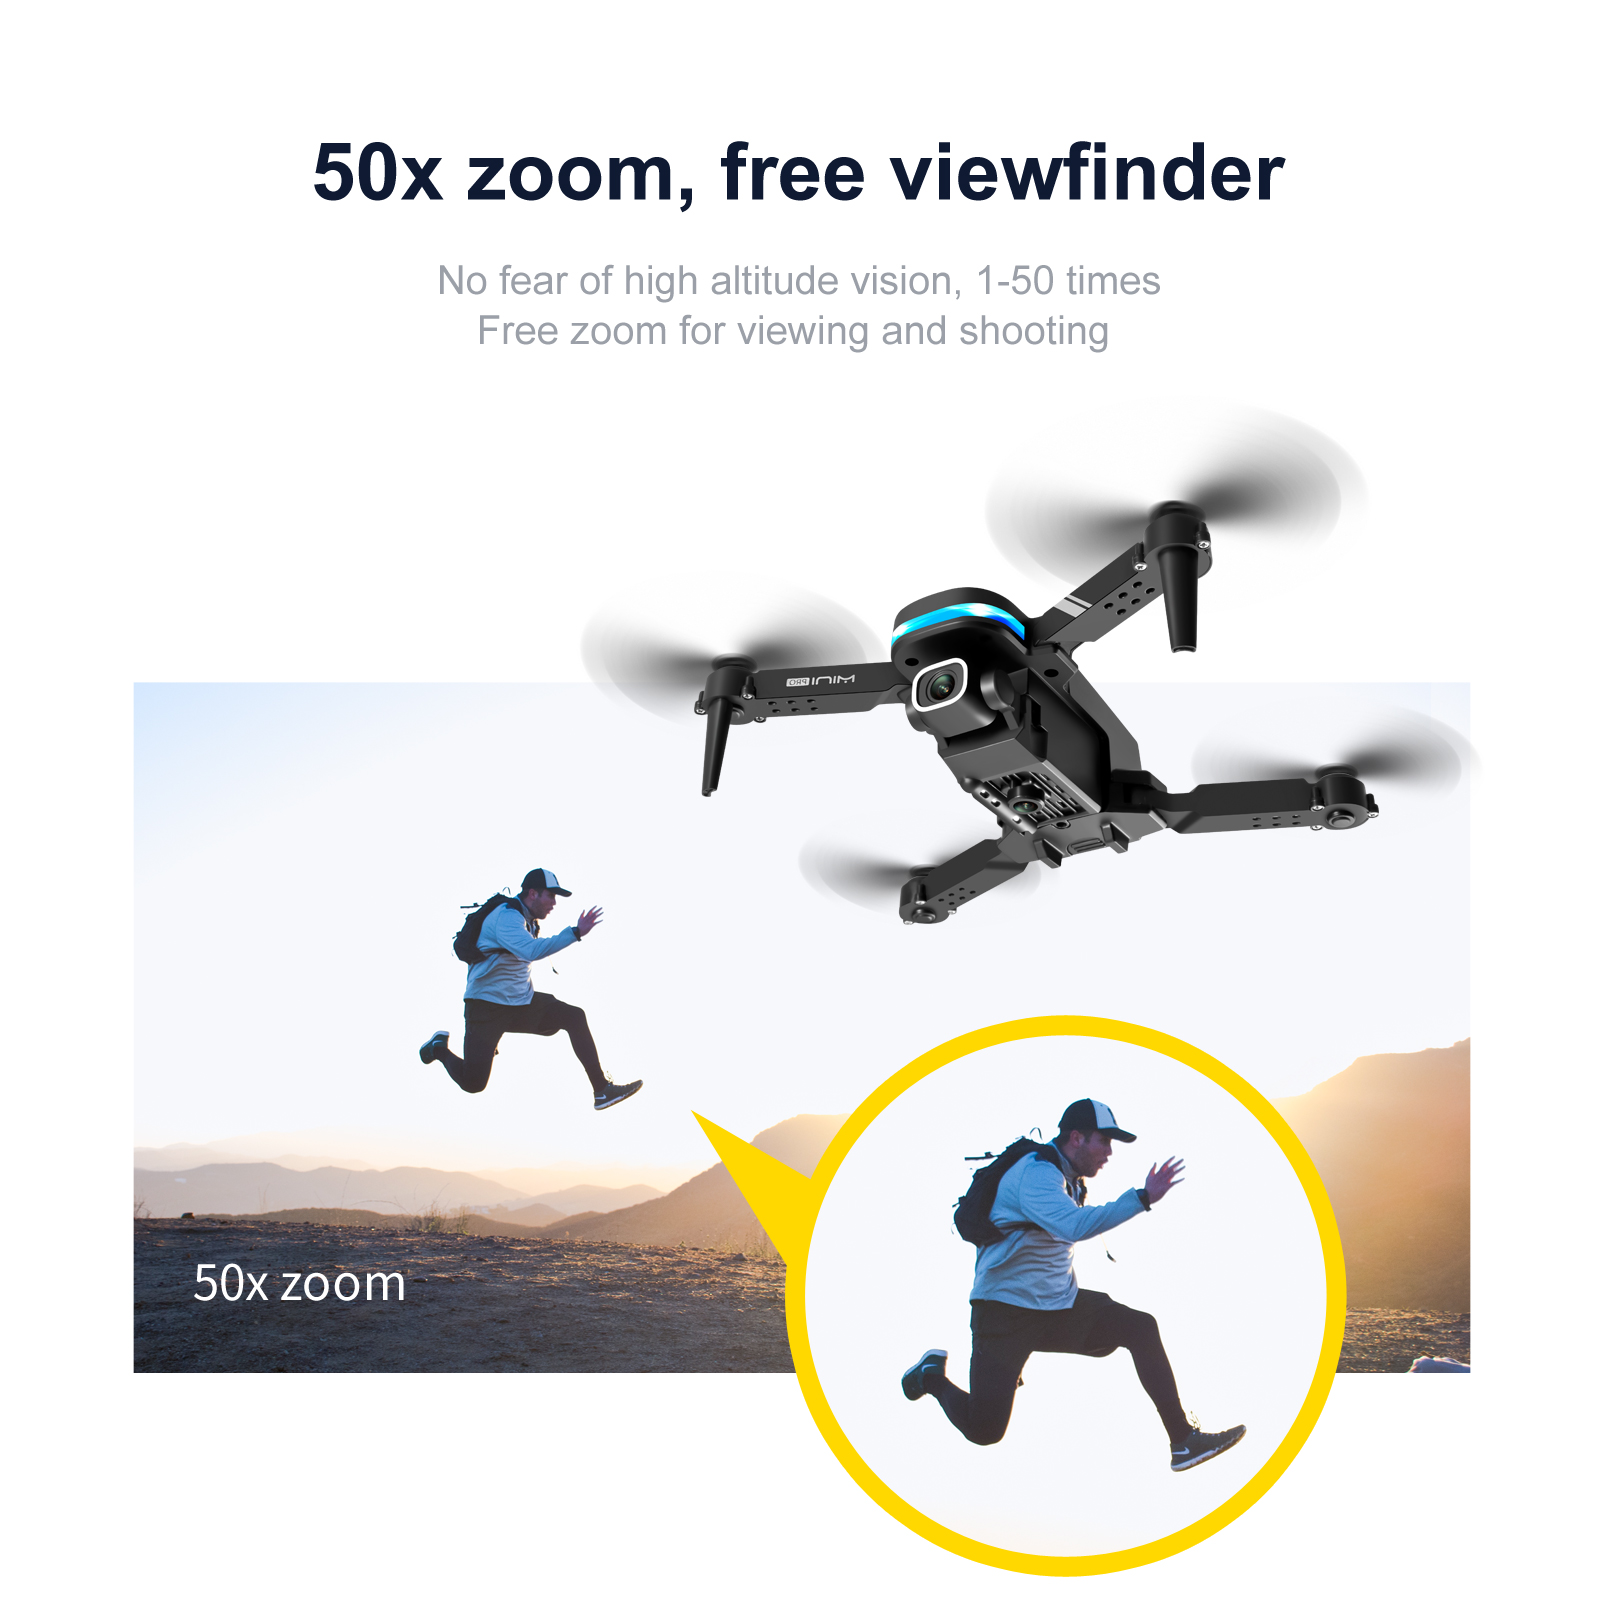 KY910-Mini-WiFi-FPV-with-4K-HD-Dual-50x-ZOOM-Camera-Altitude-Hold-Mode-Gravity-Control-Foldable-RC-D-1902386-17